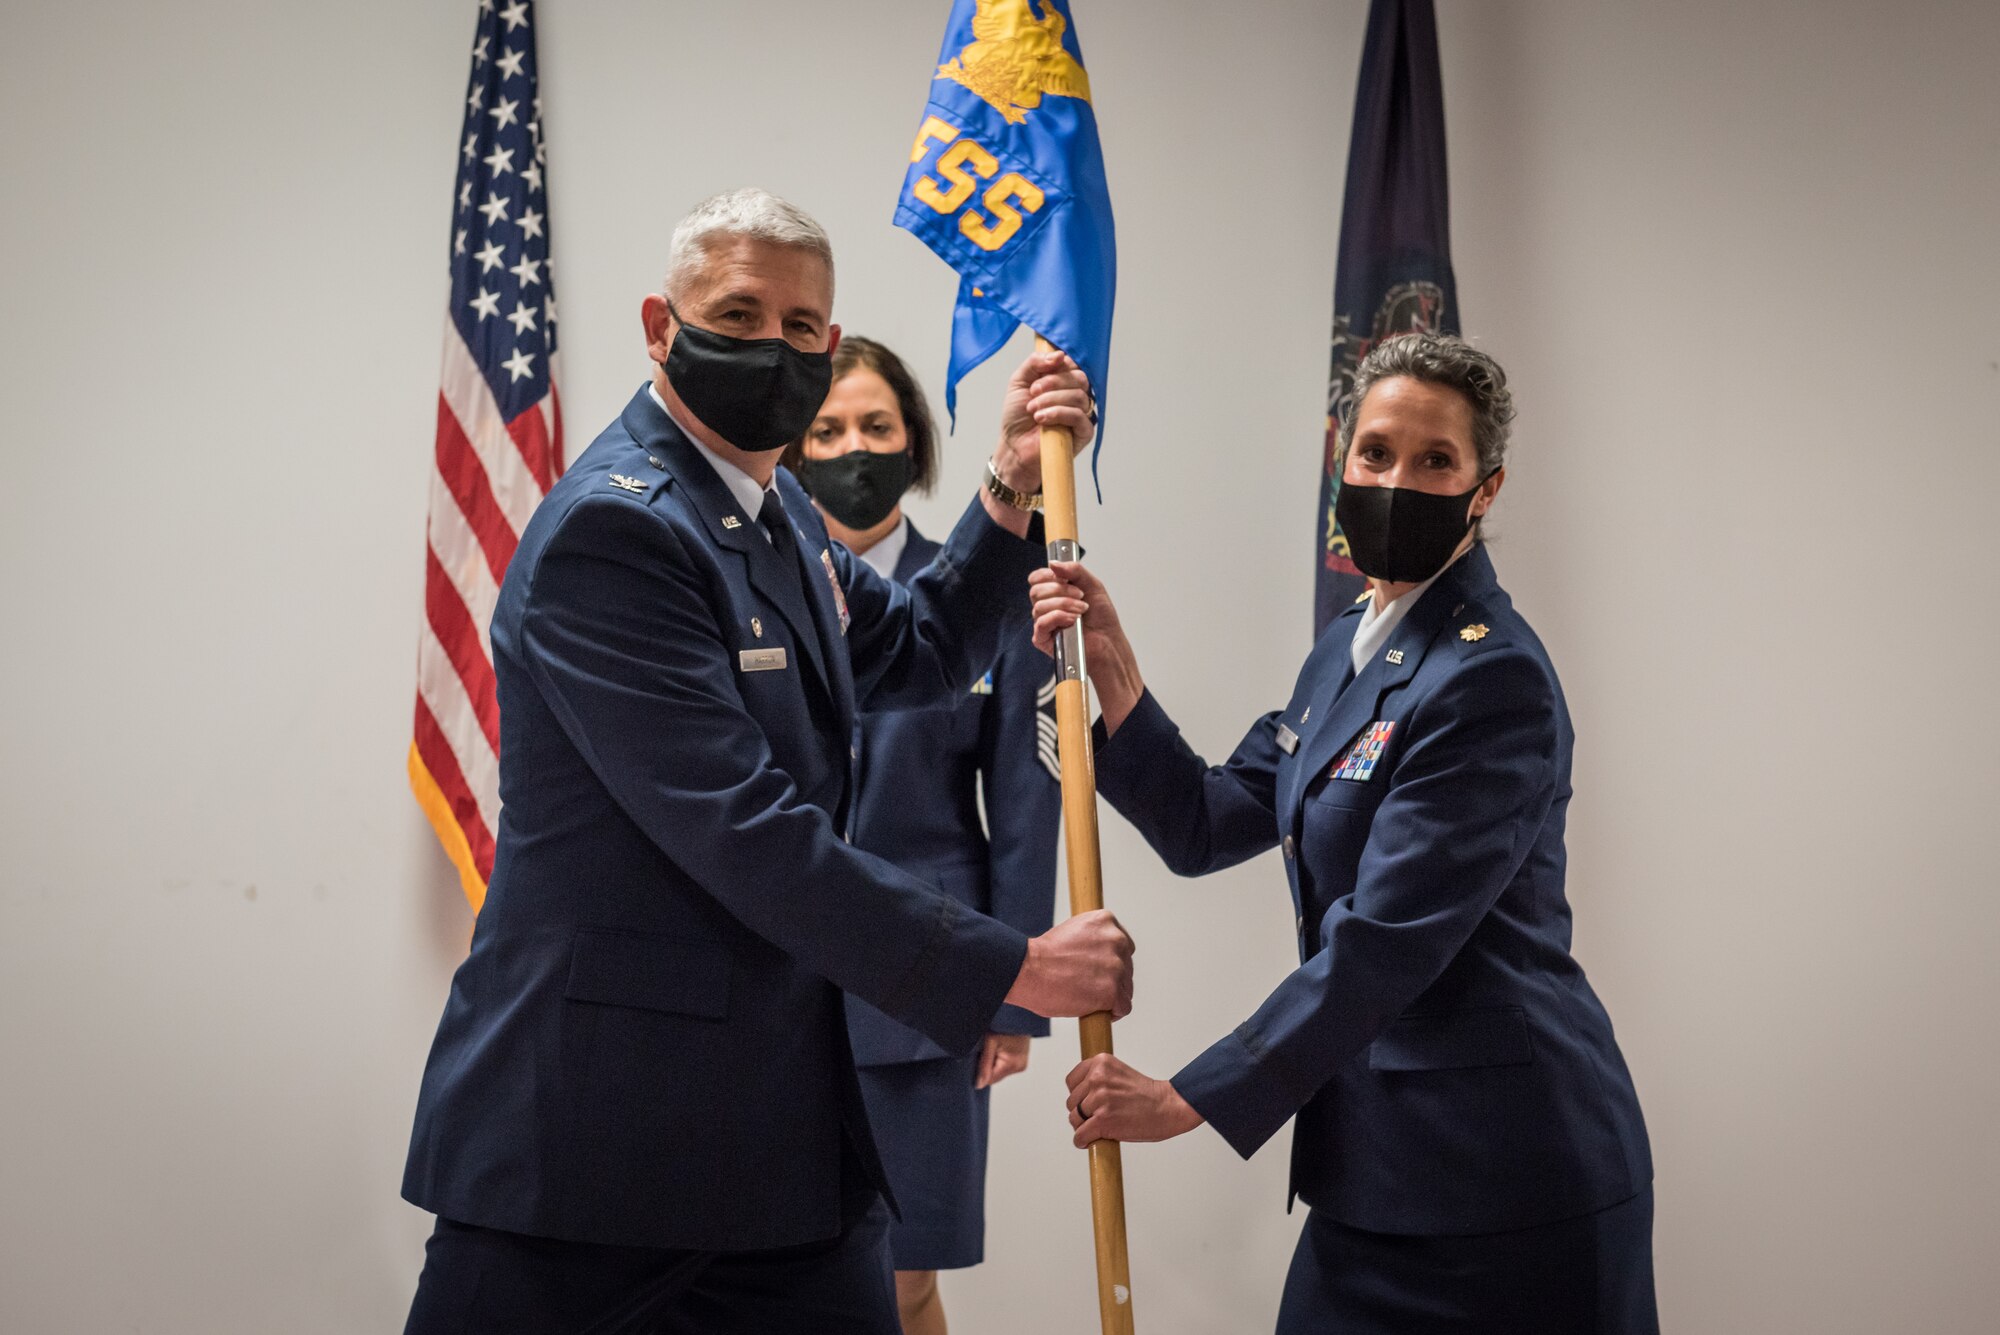 U.S. Air Force Maj. Anne Furman, right, accepts the 193rd Special Operations Force Support Squadron guidon from Col. Scott Harron, 193rd Special Operations Mission Support Group commander, Pennsylvania Air National Guard, during an assumption of command ceremony, May 15, 2021 at the 193rd Special Operations Wing in Middletown, Pennsylvania